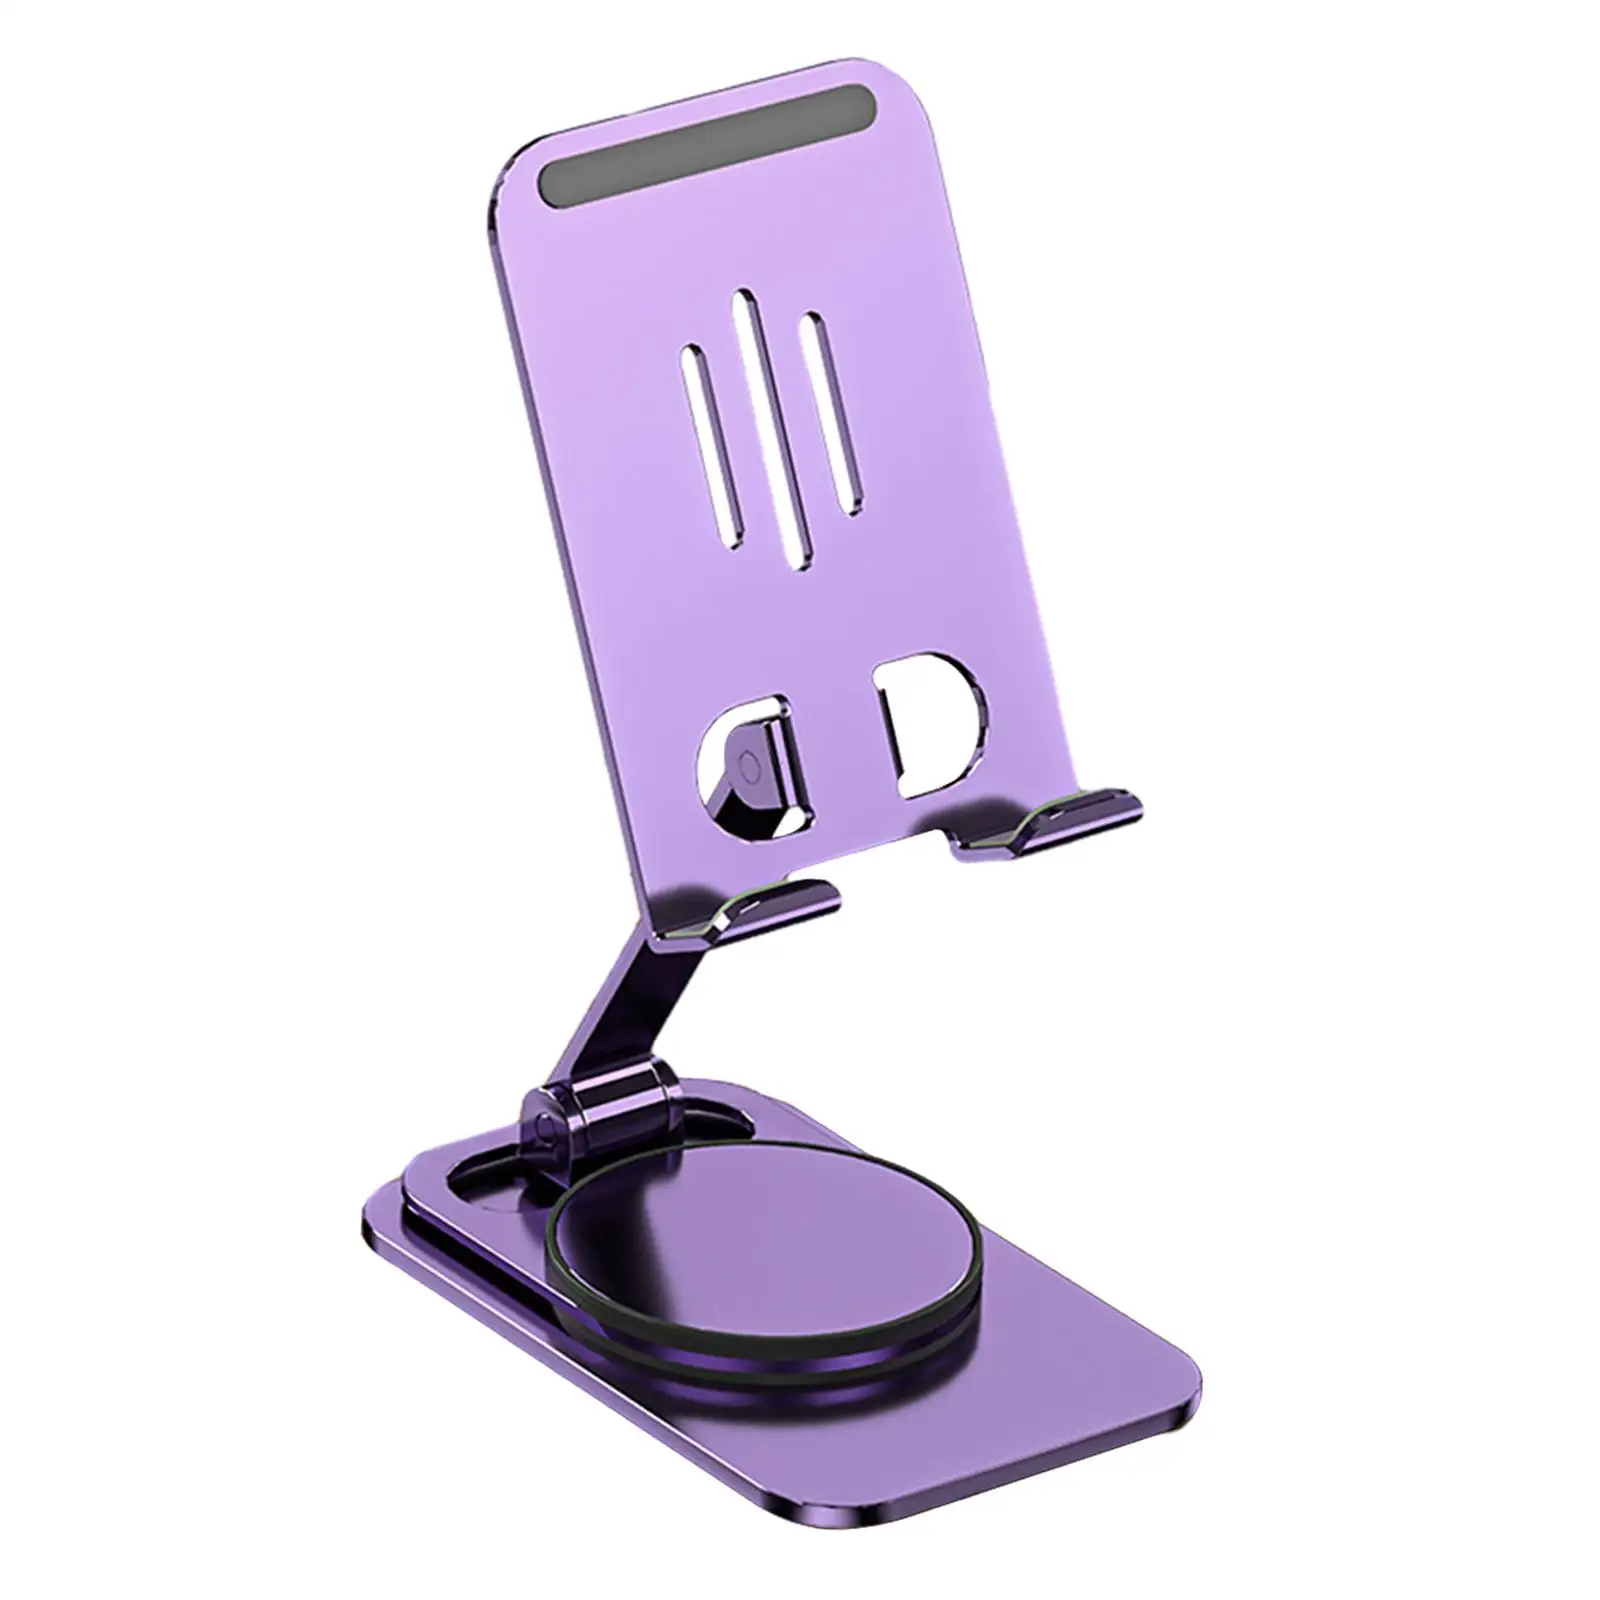 Phone Stand Portable Aluminum Foldable Universal Angle Height Desktop Phone Holder Tablet Stand for Phone All Phones Desk Tablet